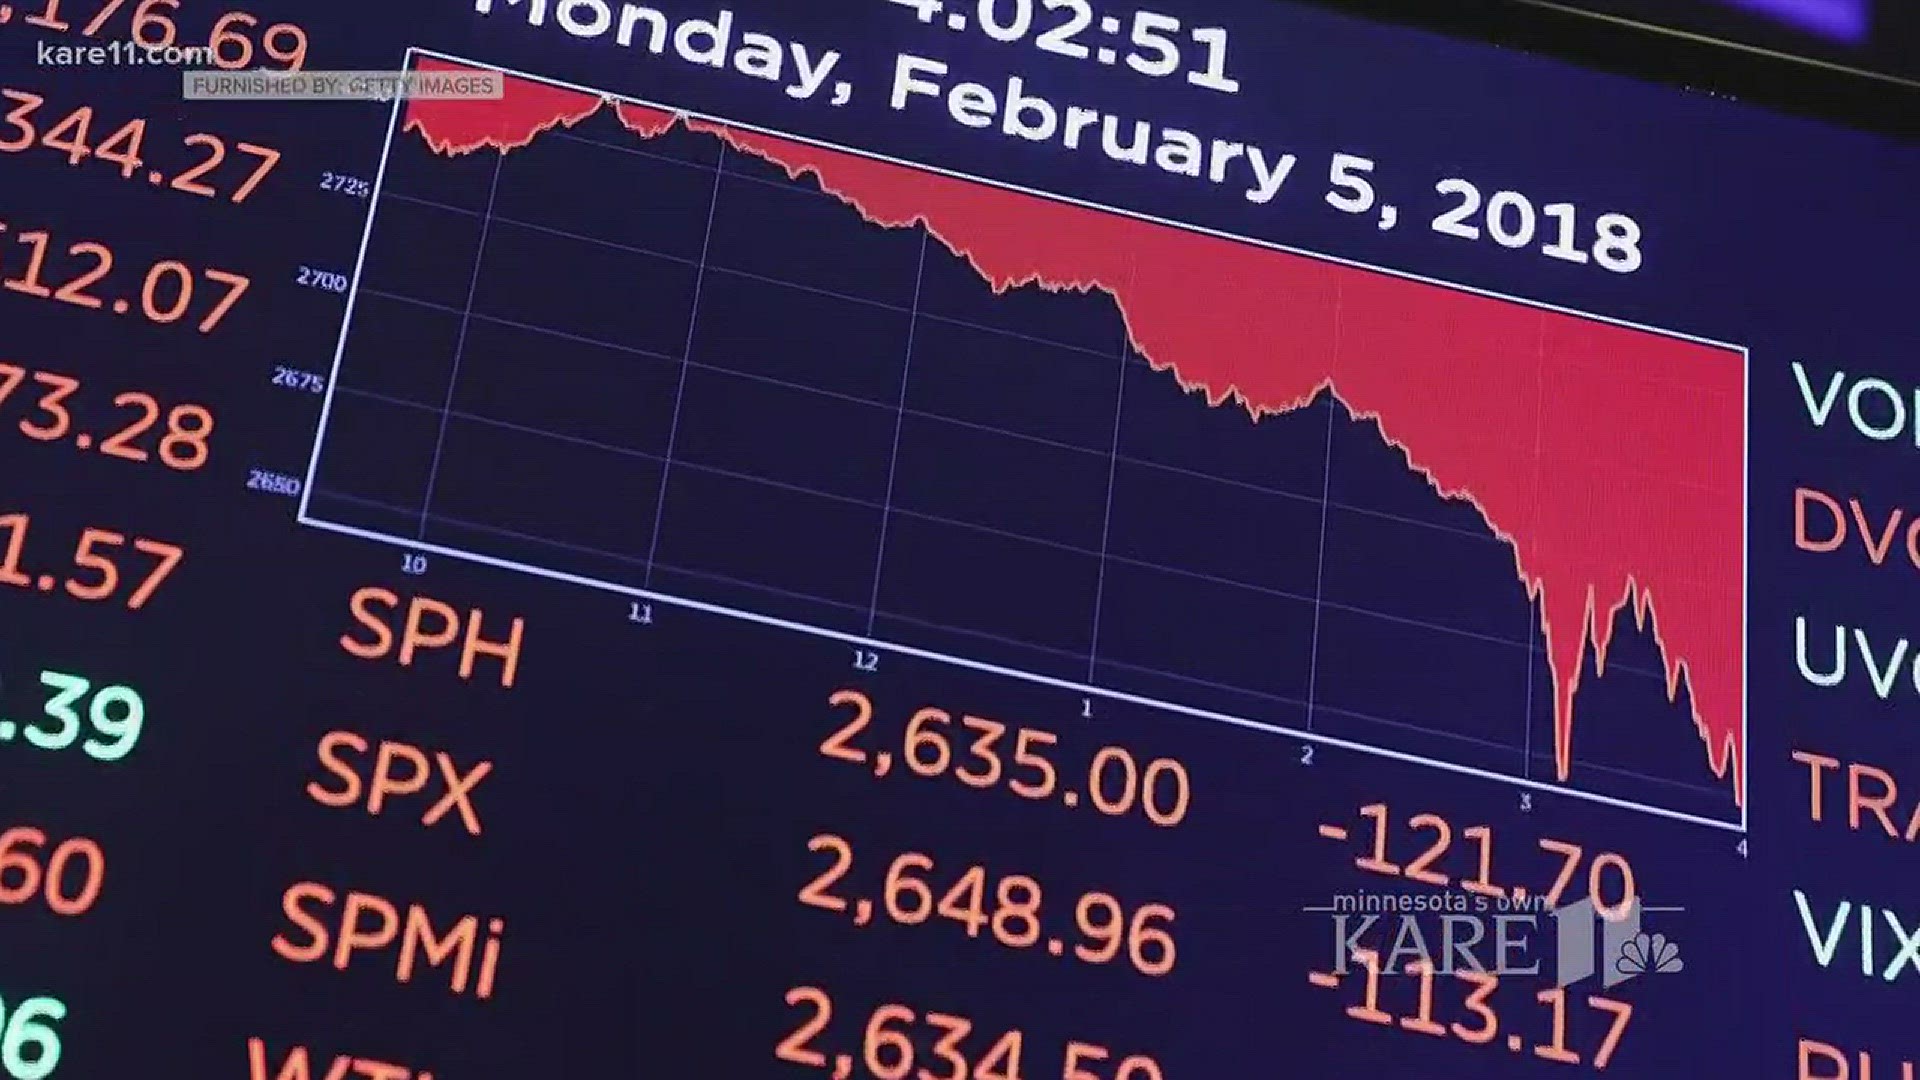 Wondering what the Dow's nosedive means for you? Lou Raguse has insight from Senior Portfolio Manager Michael Binger. http://kare11.tv/2nM8tJb